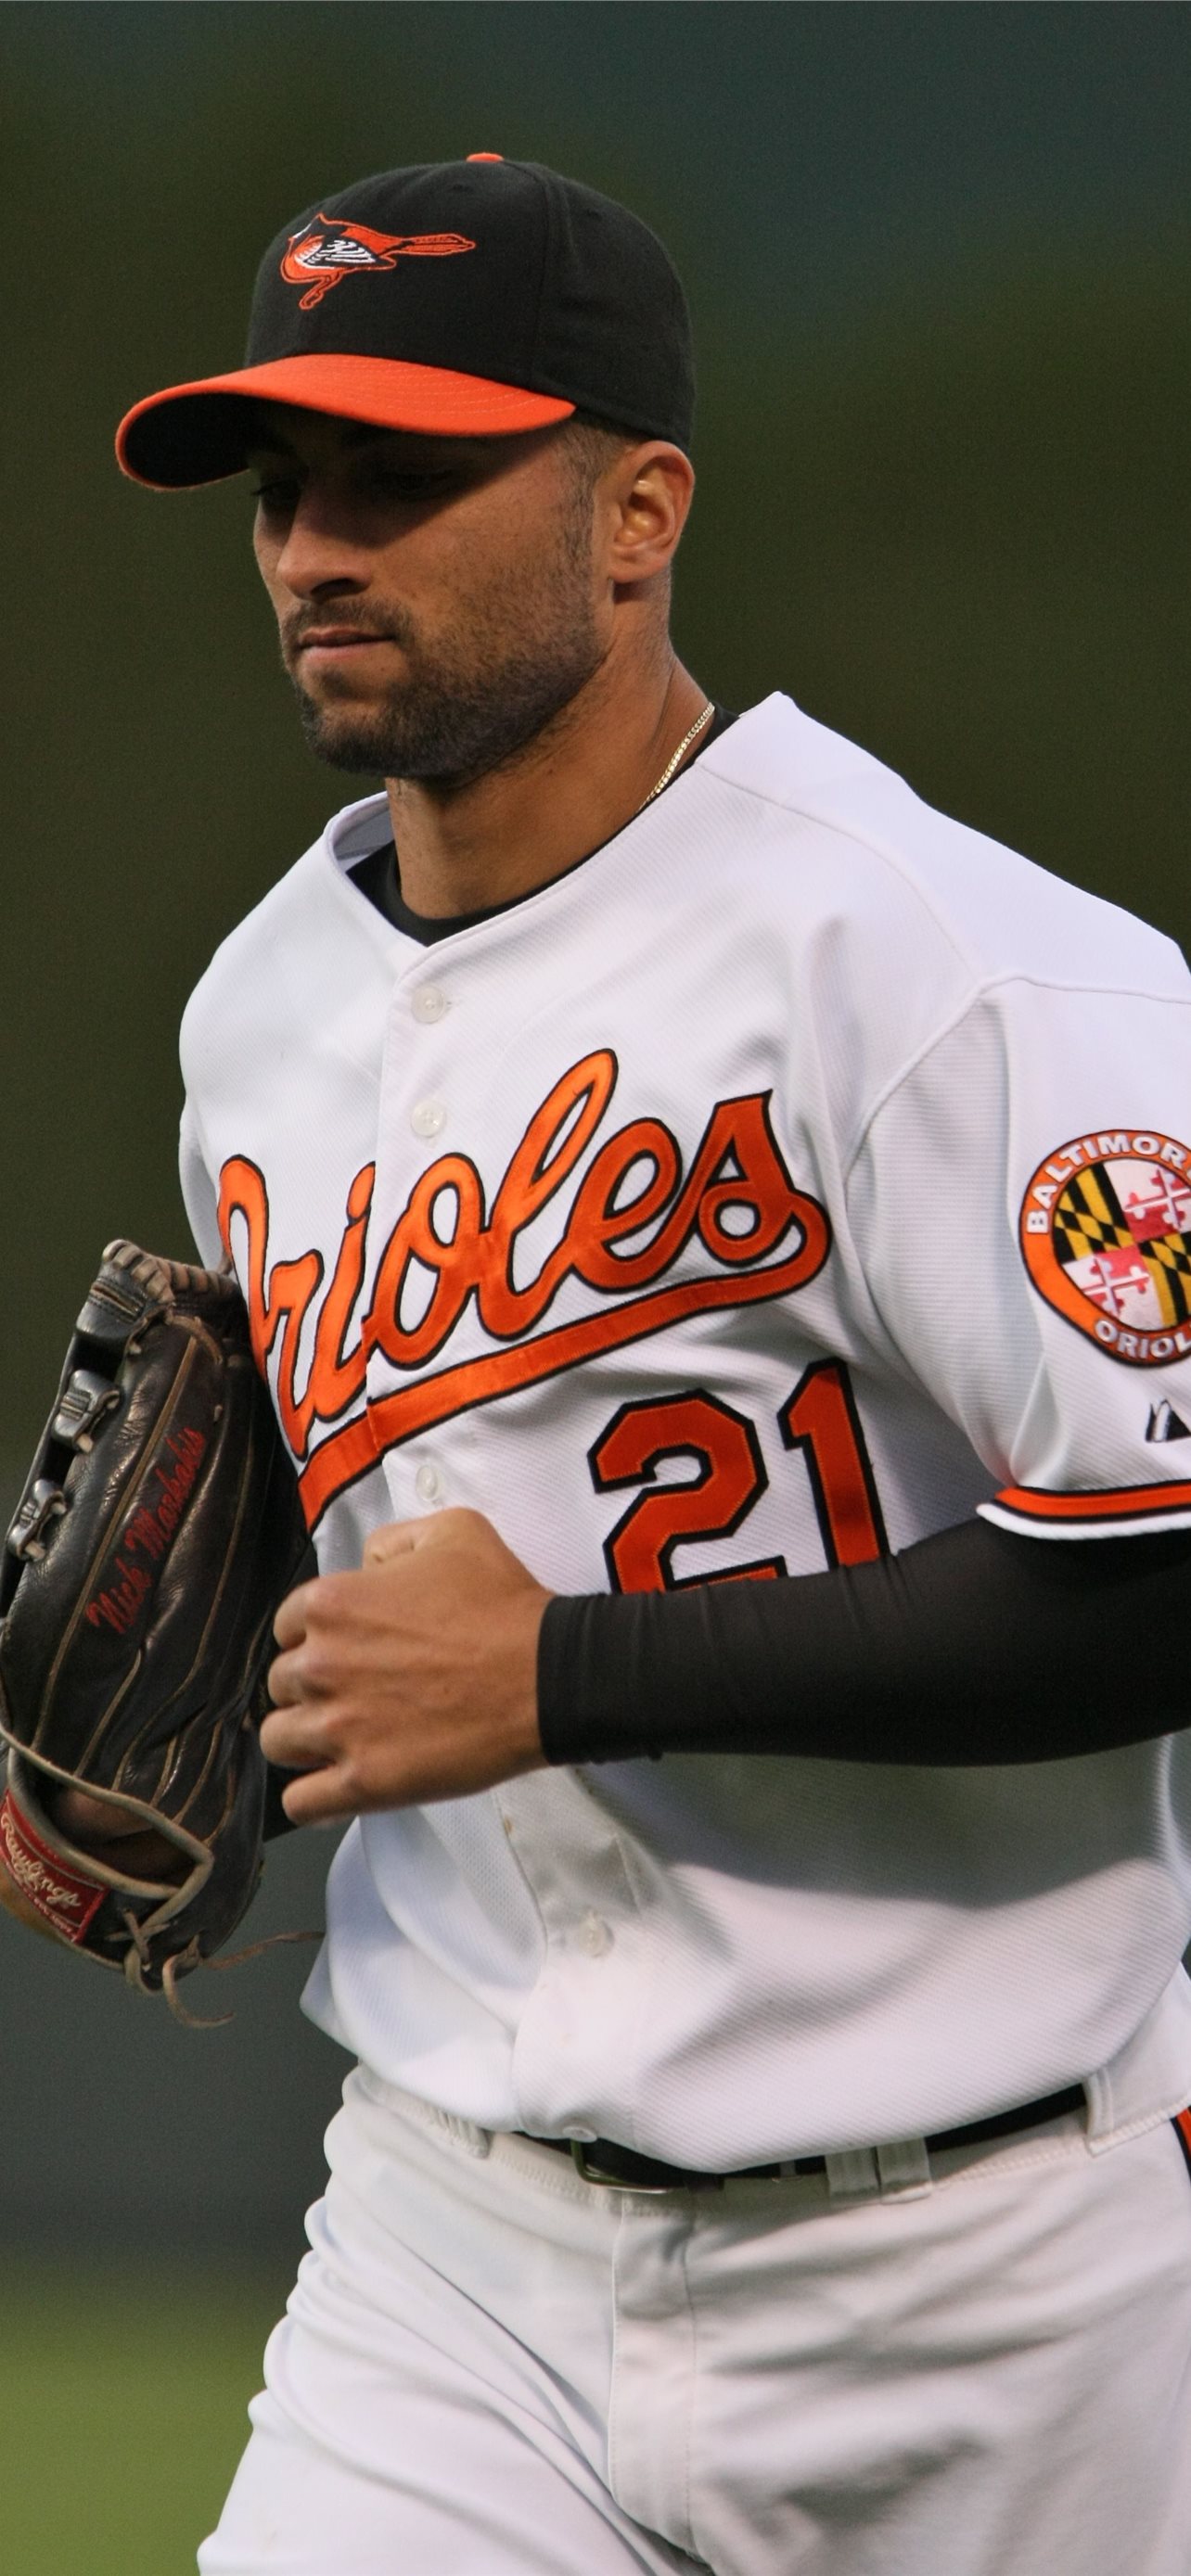 Orioles Wallpapers Group 56